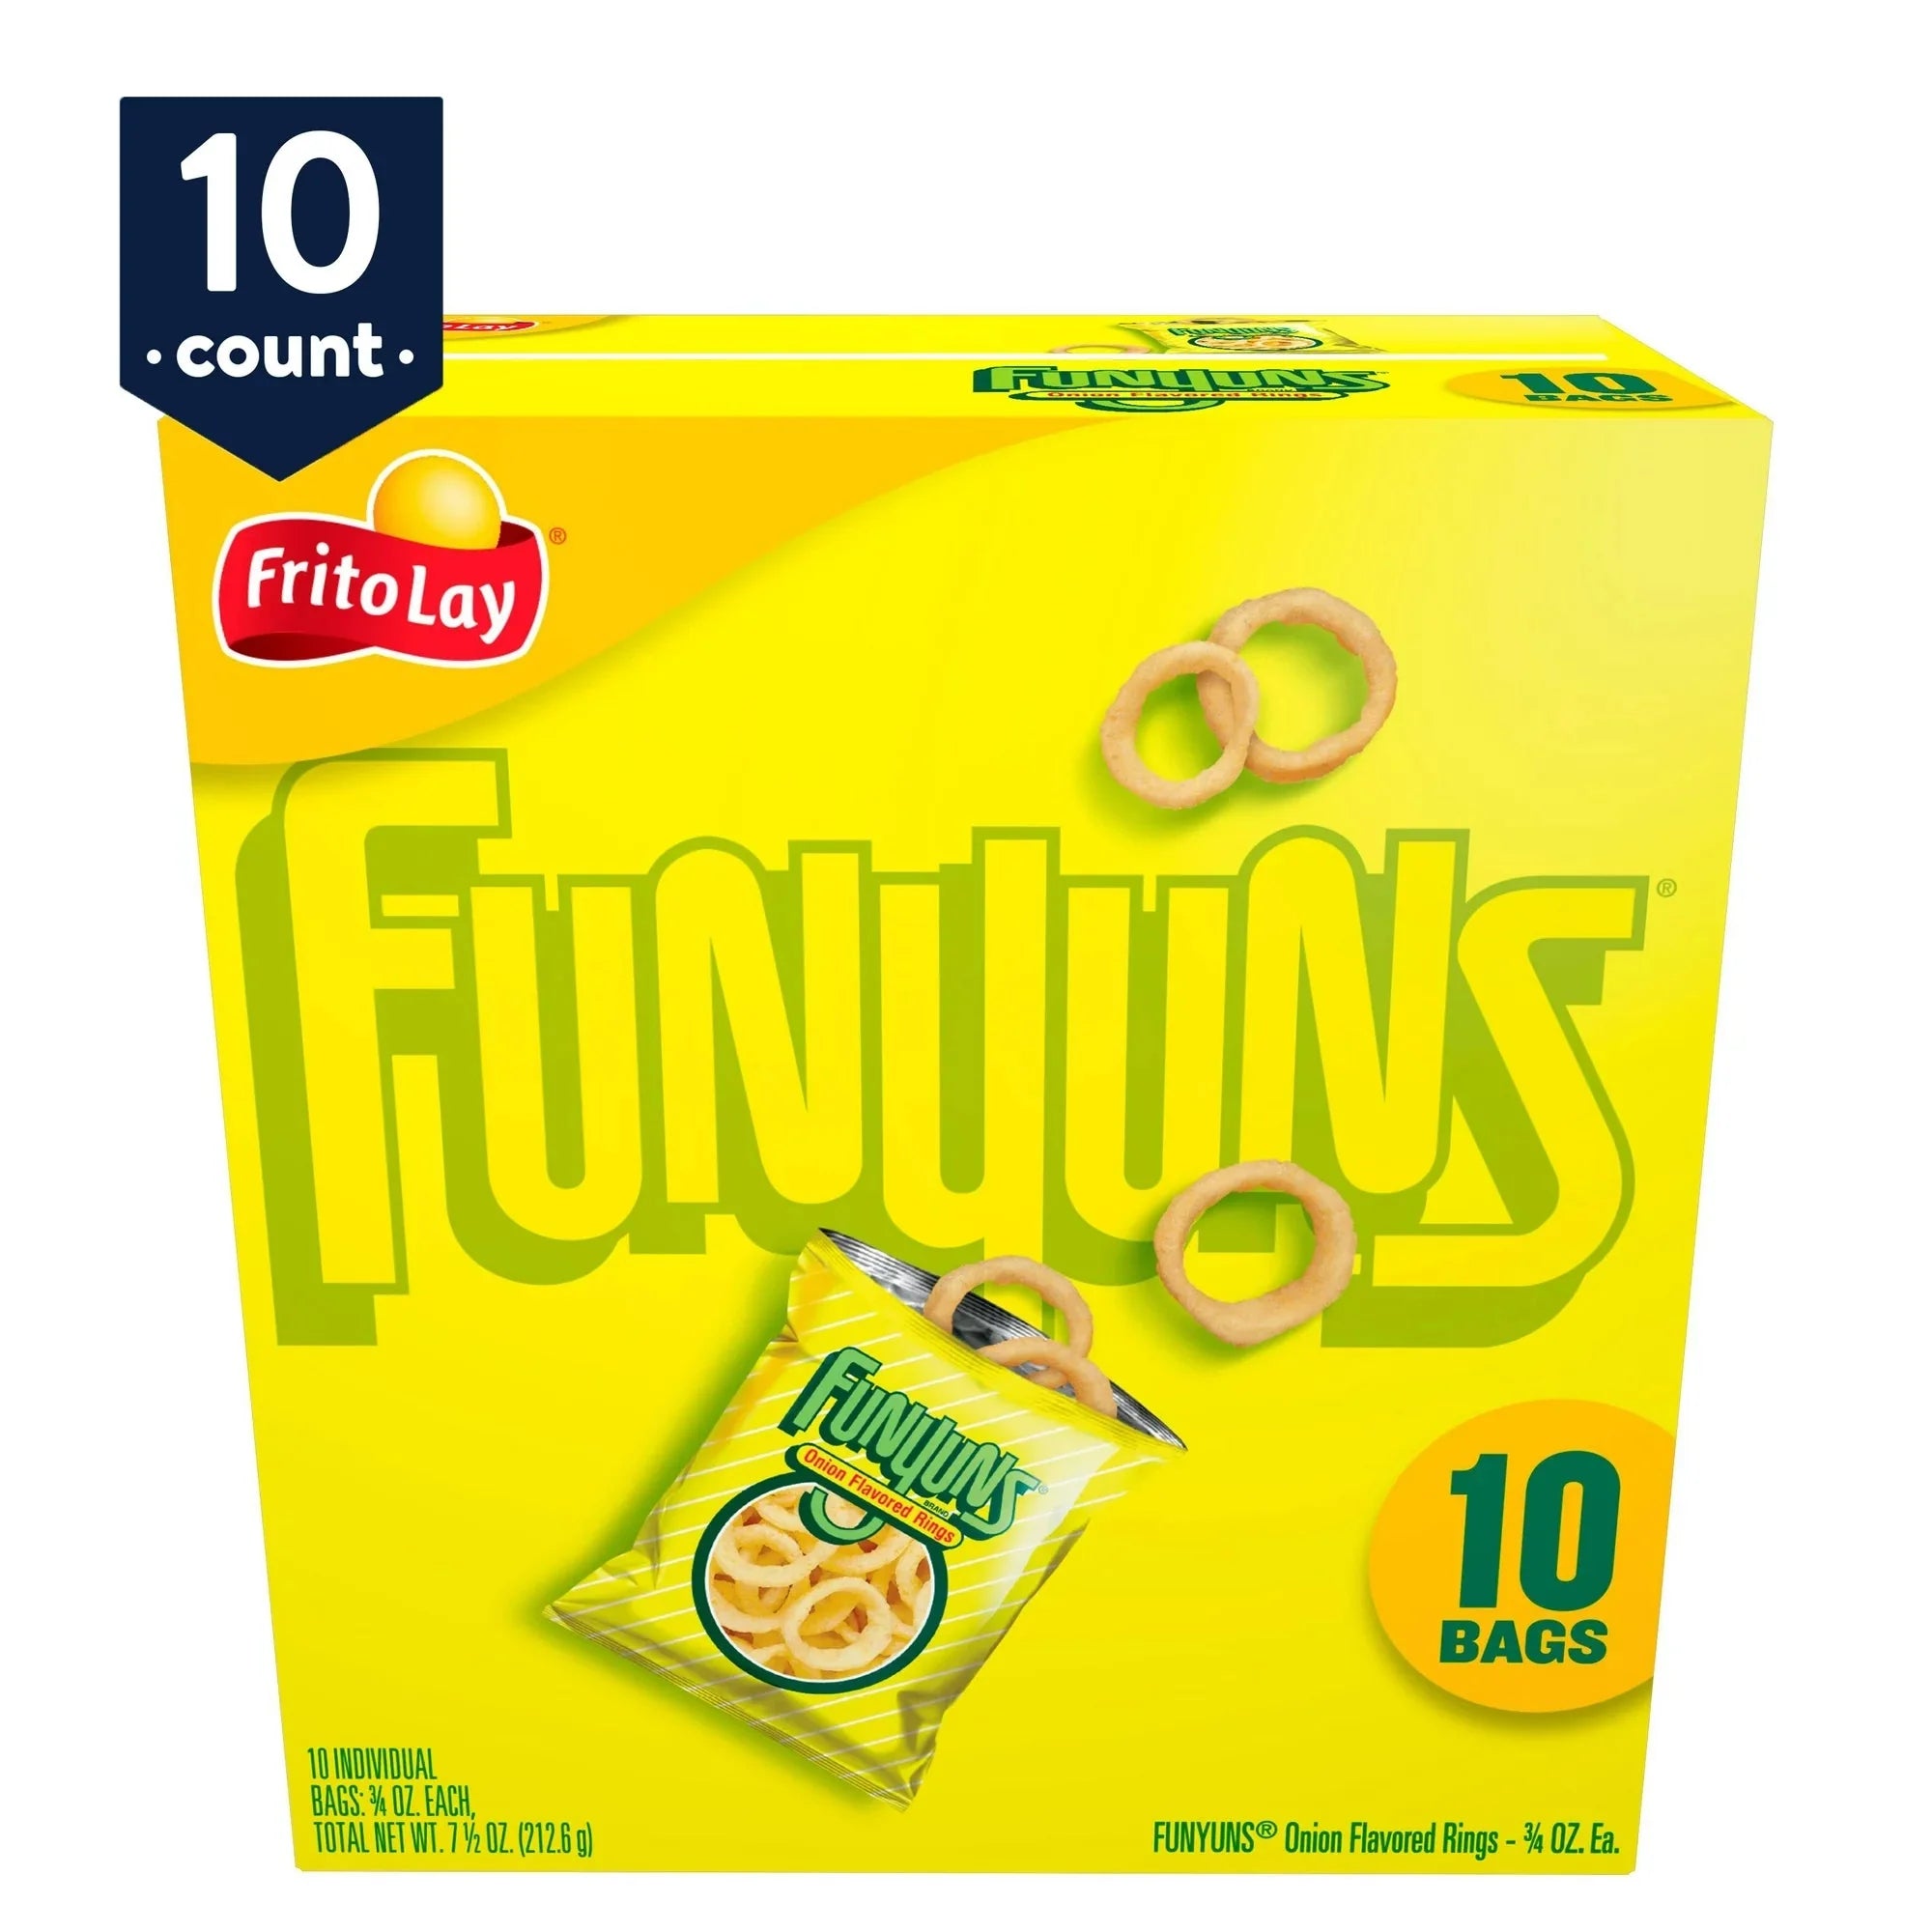 Wholesale prices with free shipping all over United States Funyuns Merchandise - Steven Deals